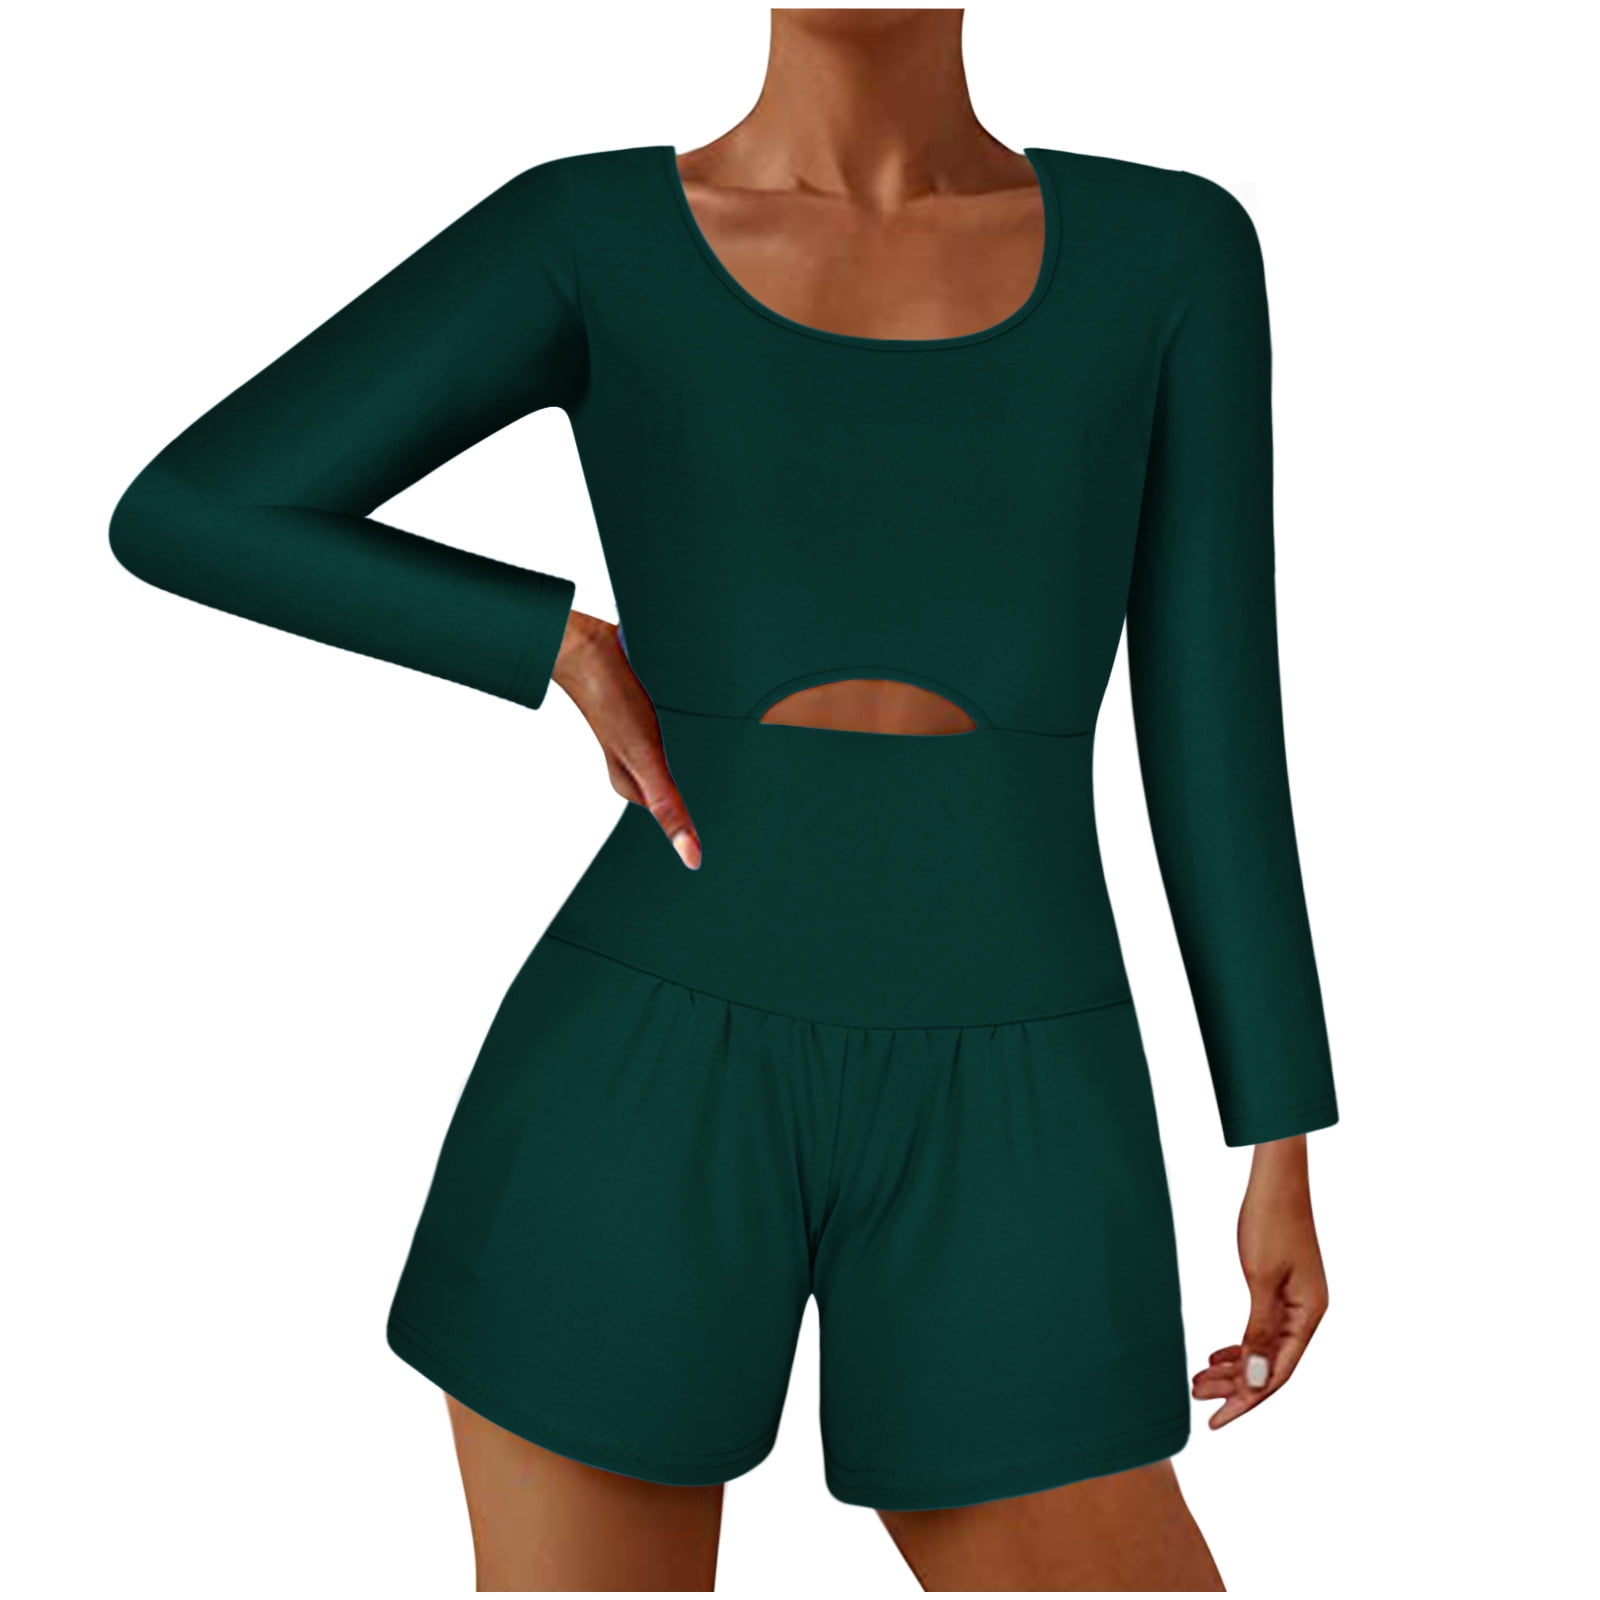 JGGSPWM Womens Hollow Out Tennis Athletic Romper Long Sleeve Workout  Jumpsuits Running One Piece Outfits Gym Onesie Army Green L 